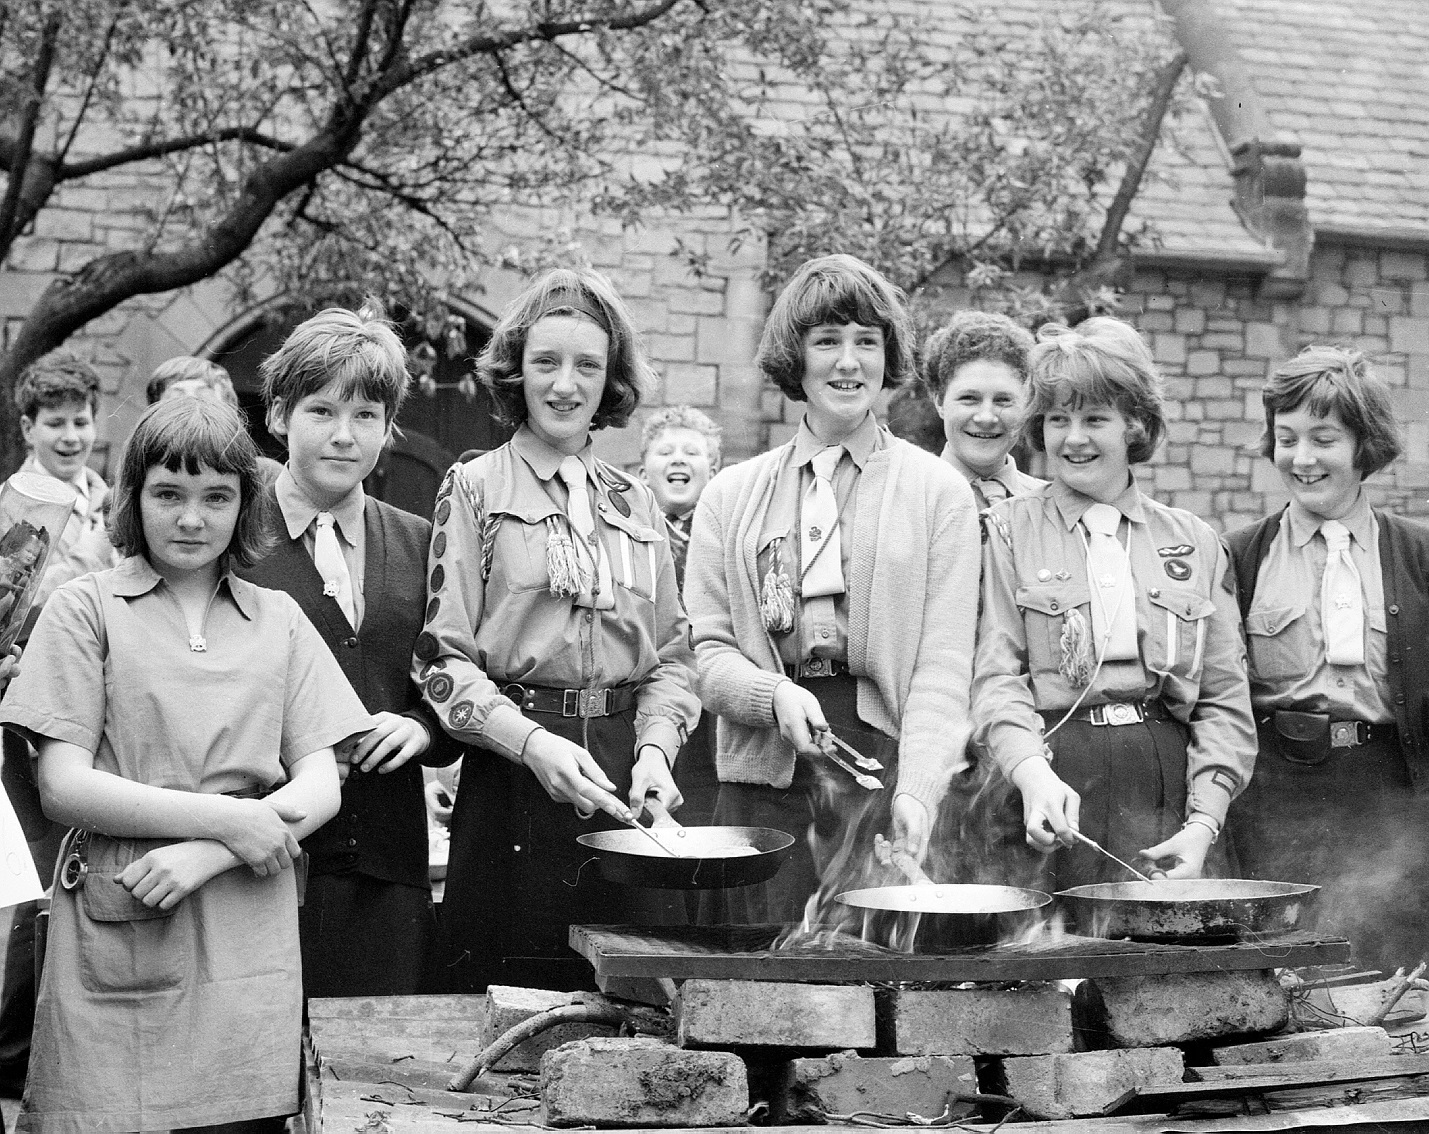 A black and white photo of a girlguiding group of women and girls stirring pots at a barbeque.